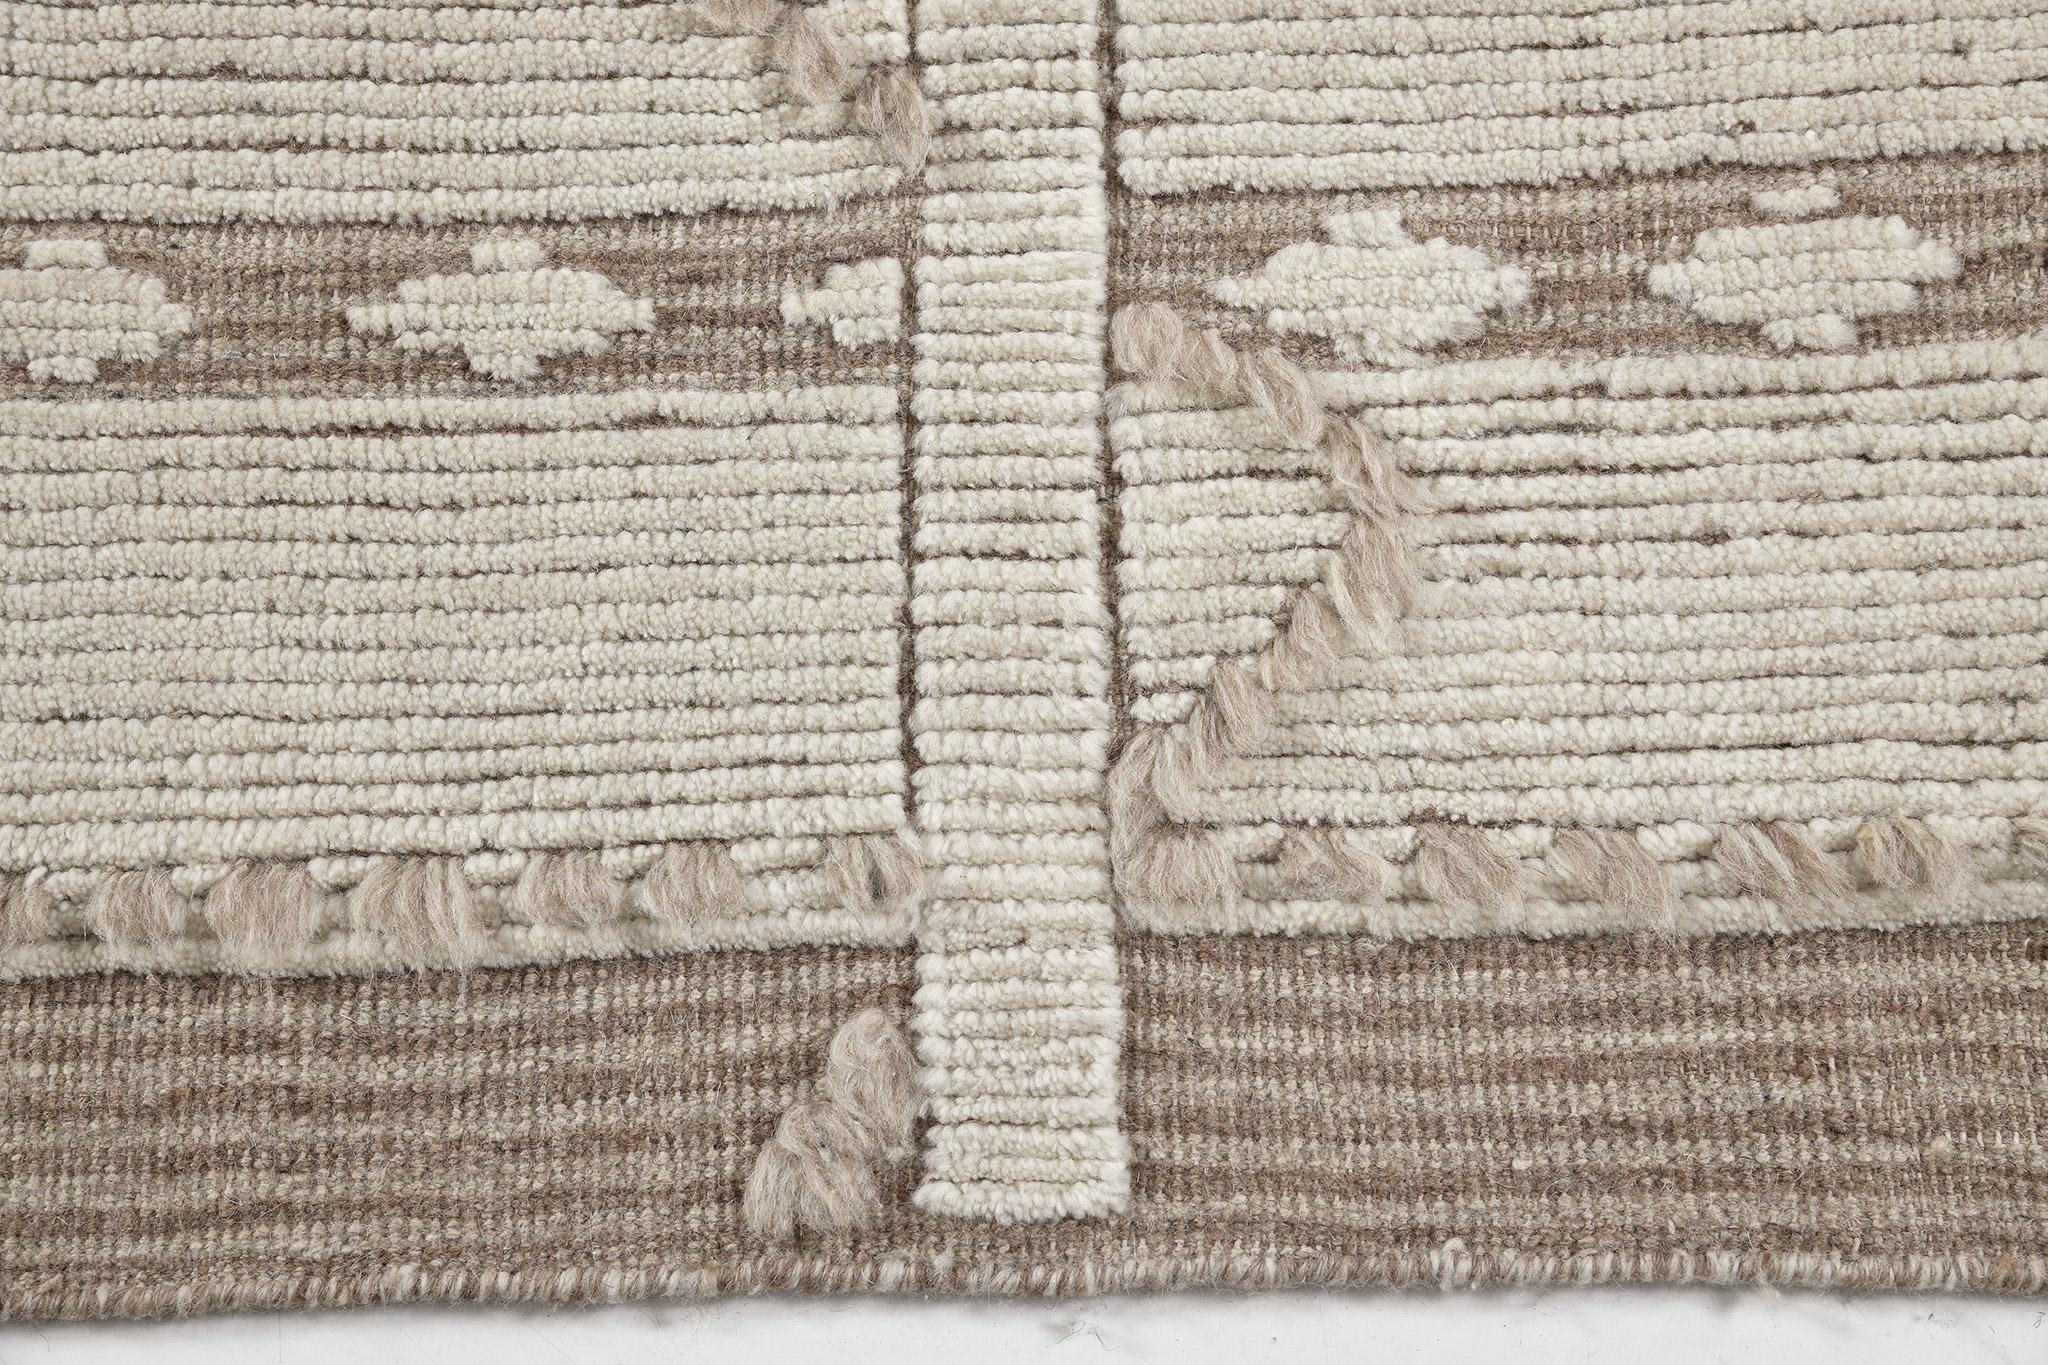 Verdot’ in Estancia collection is an exquisite home decor that features a captivating design through this beige and tan colour. With its interesting flow and stunning embossed details, plays a huge factor in establishing the rug's overall stunning